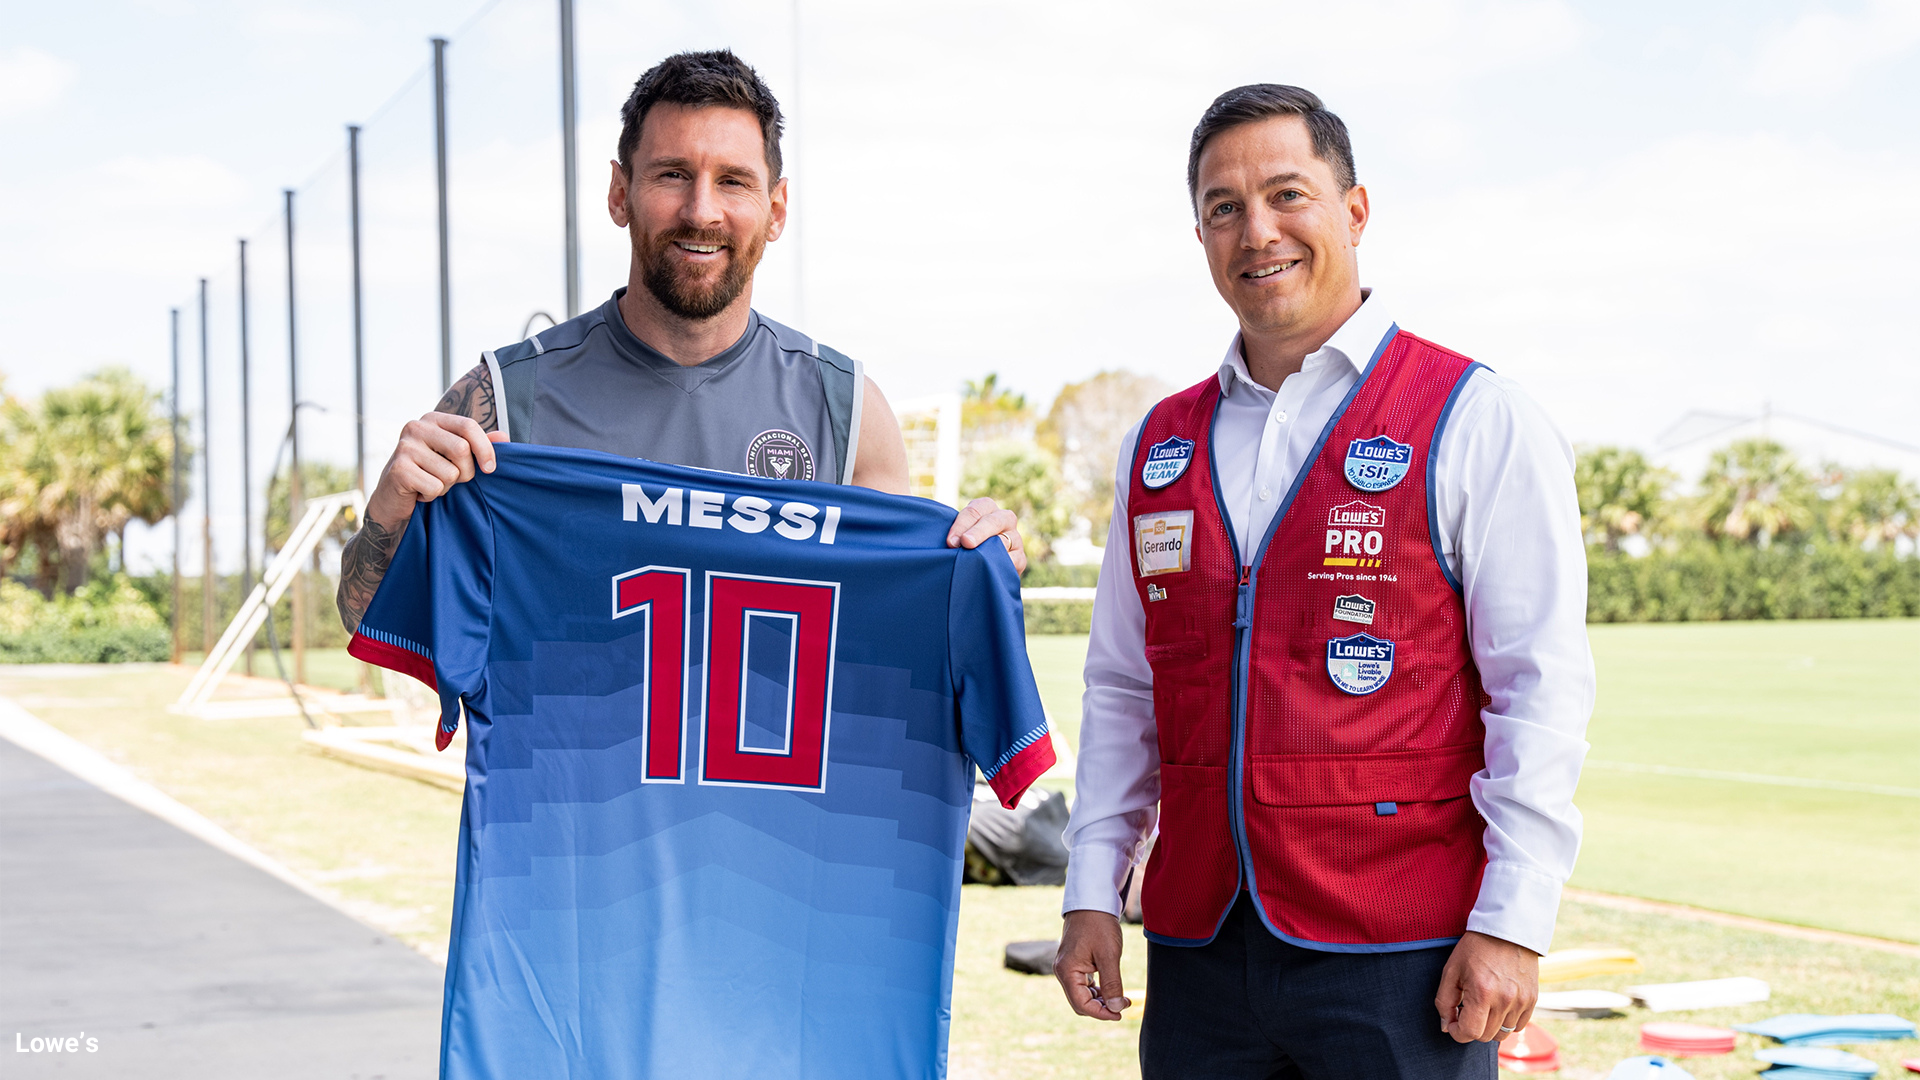 Lionel Messi signs multiyear deal with Lowe's home improvement